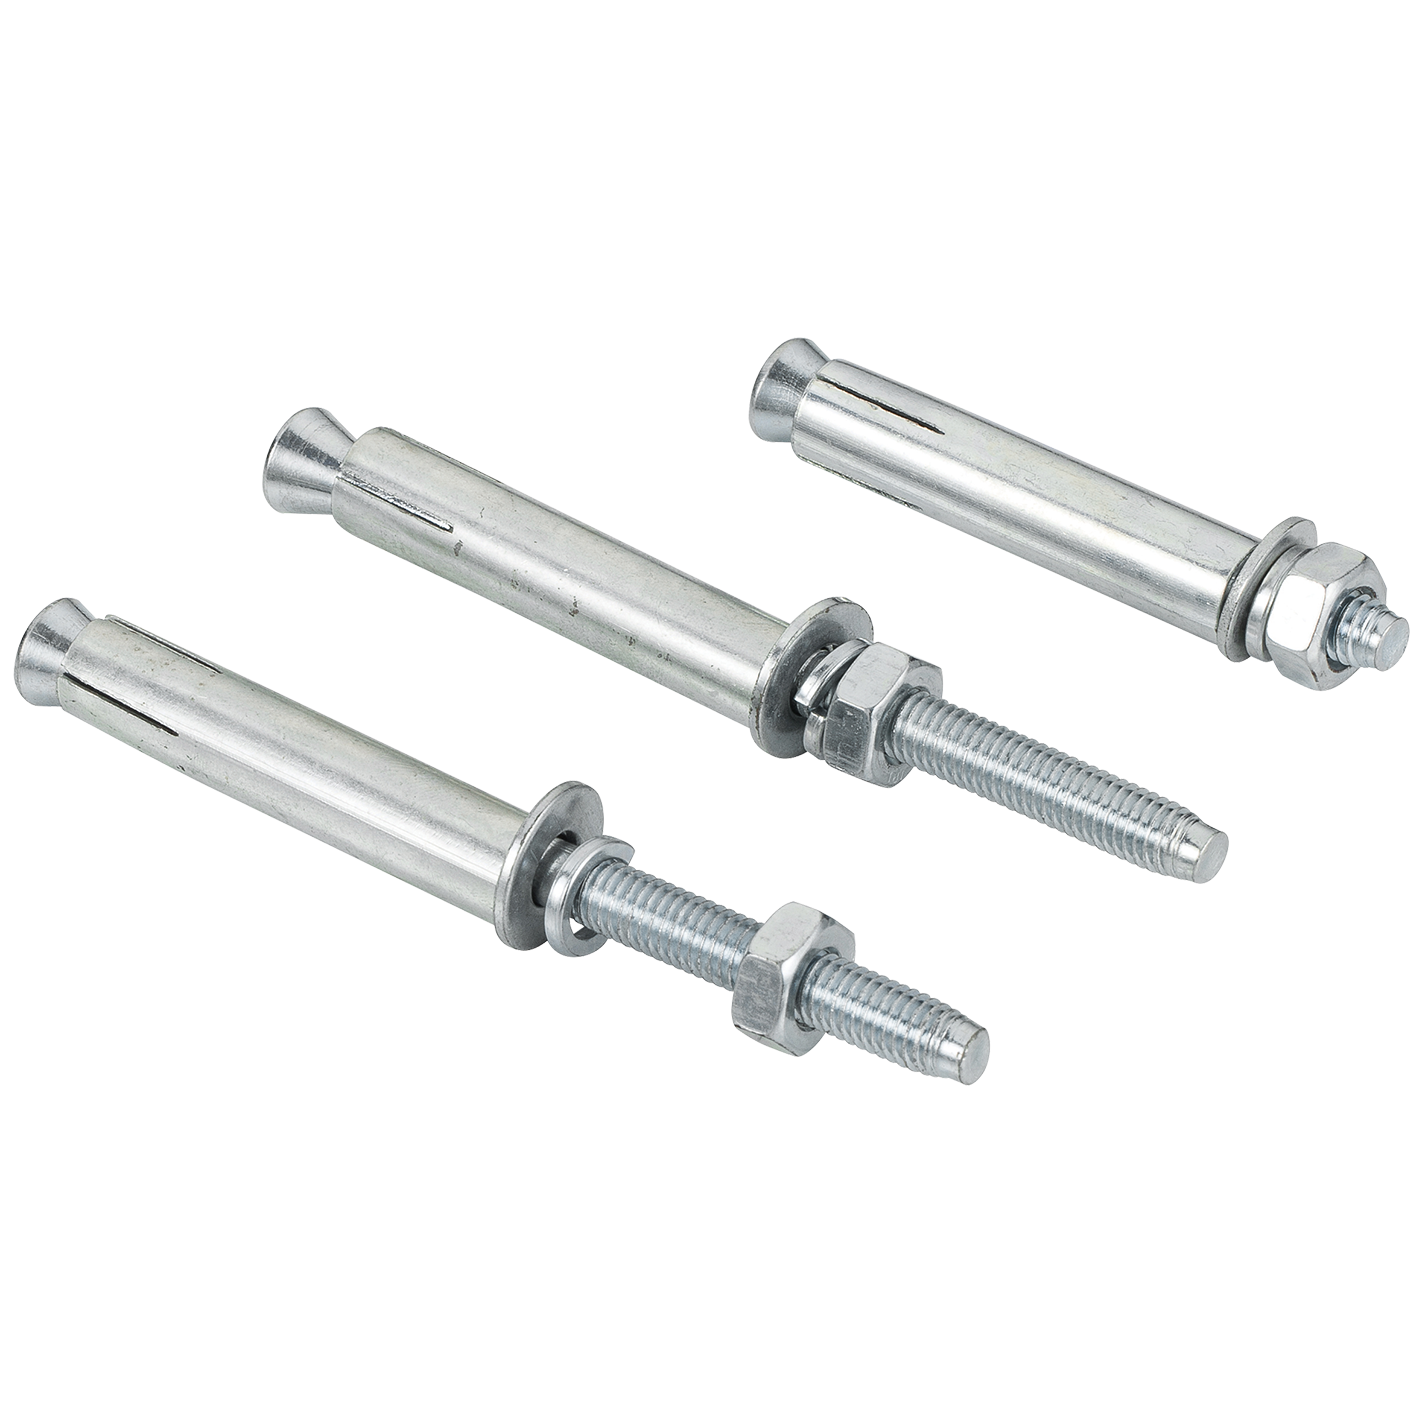 M8X12 AIRPIPE WALL EXPANSION BOLT